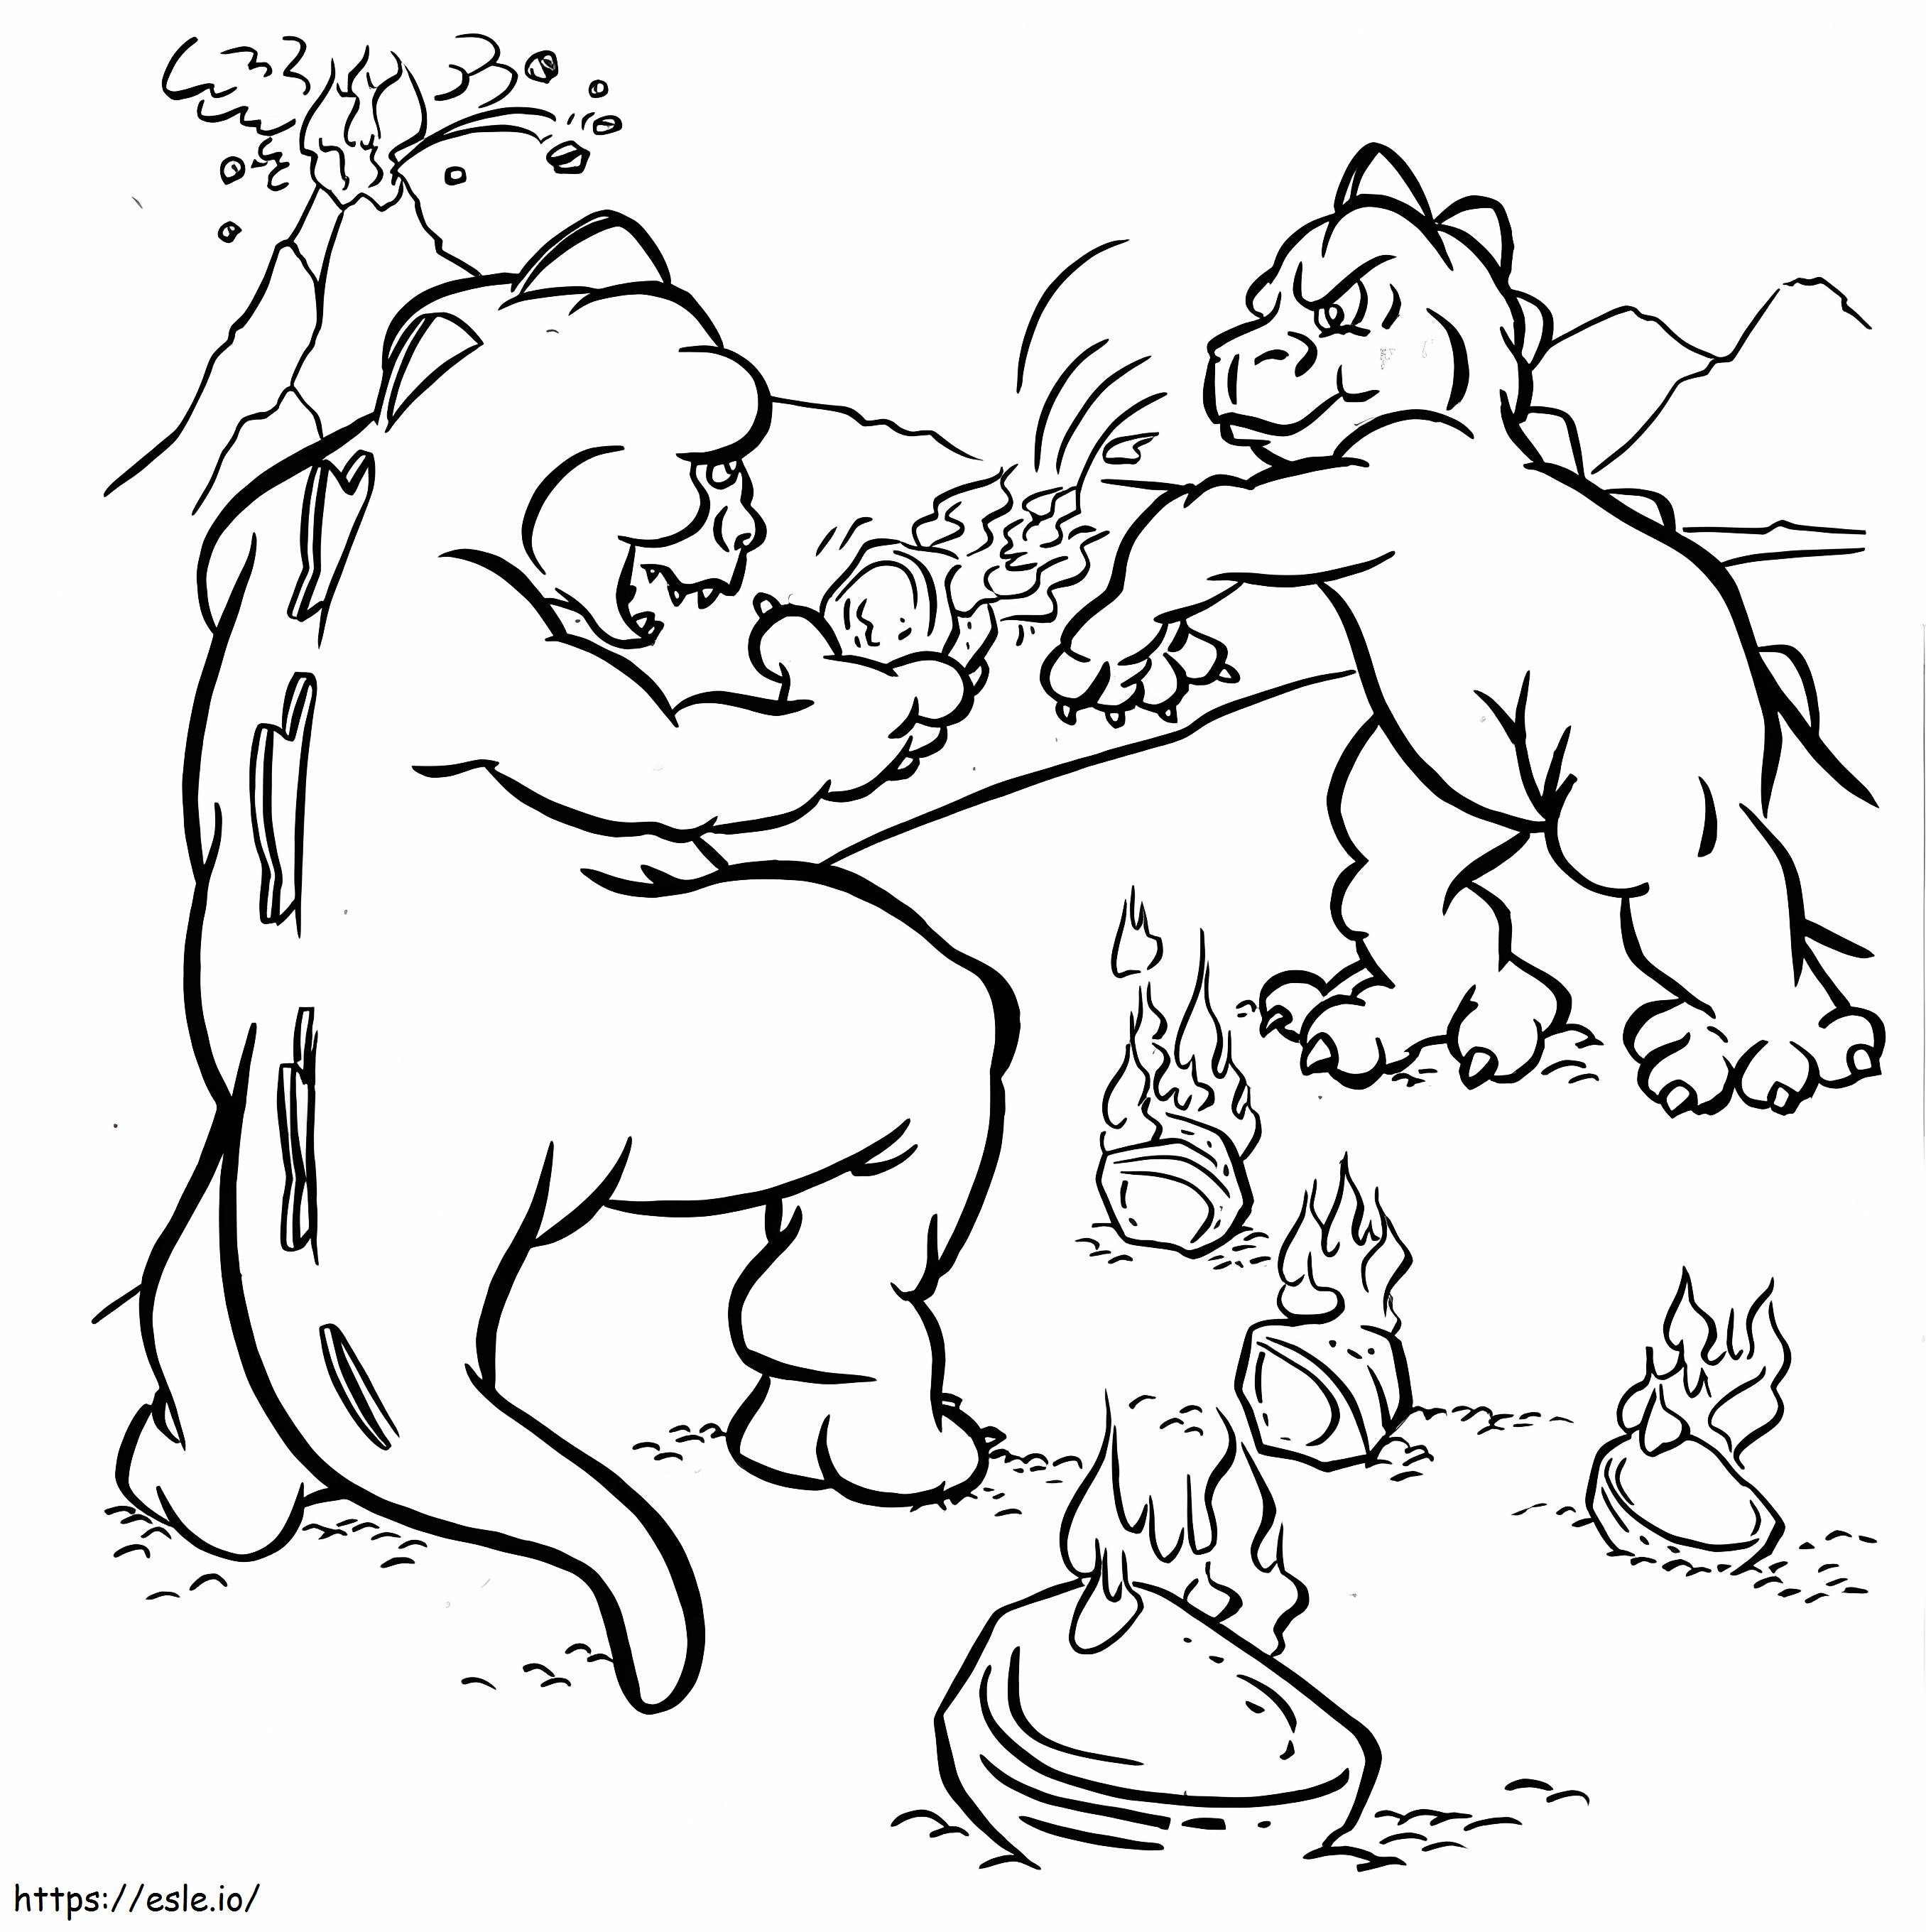 Two Funny Little Godzillas coloring page